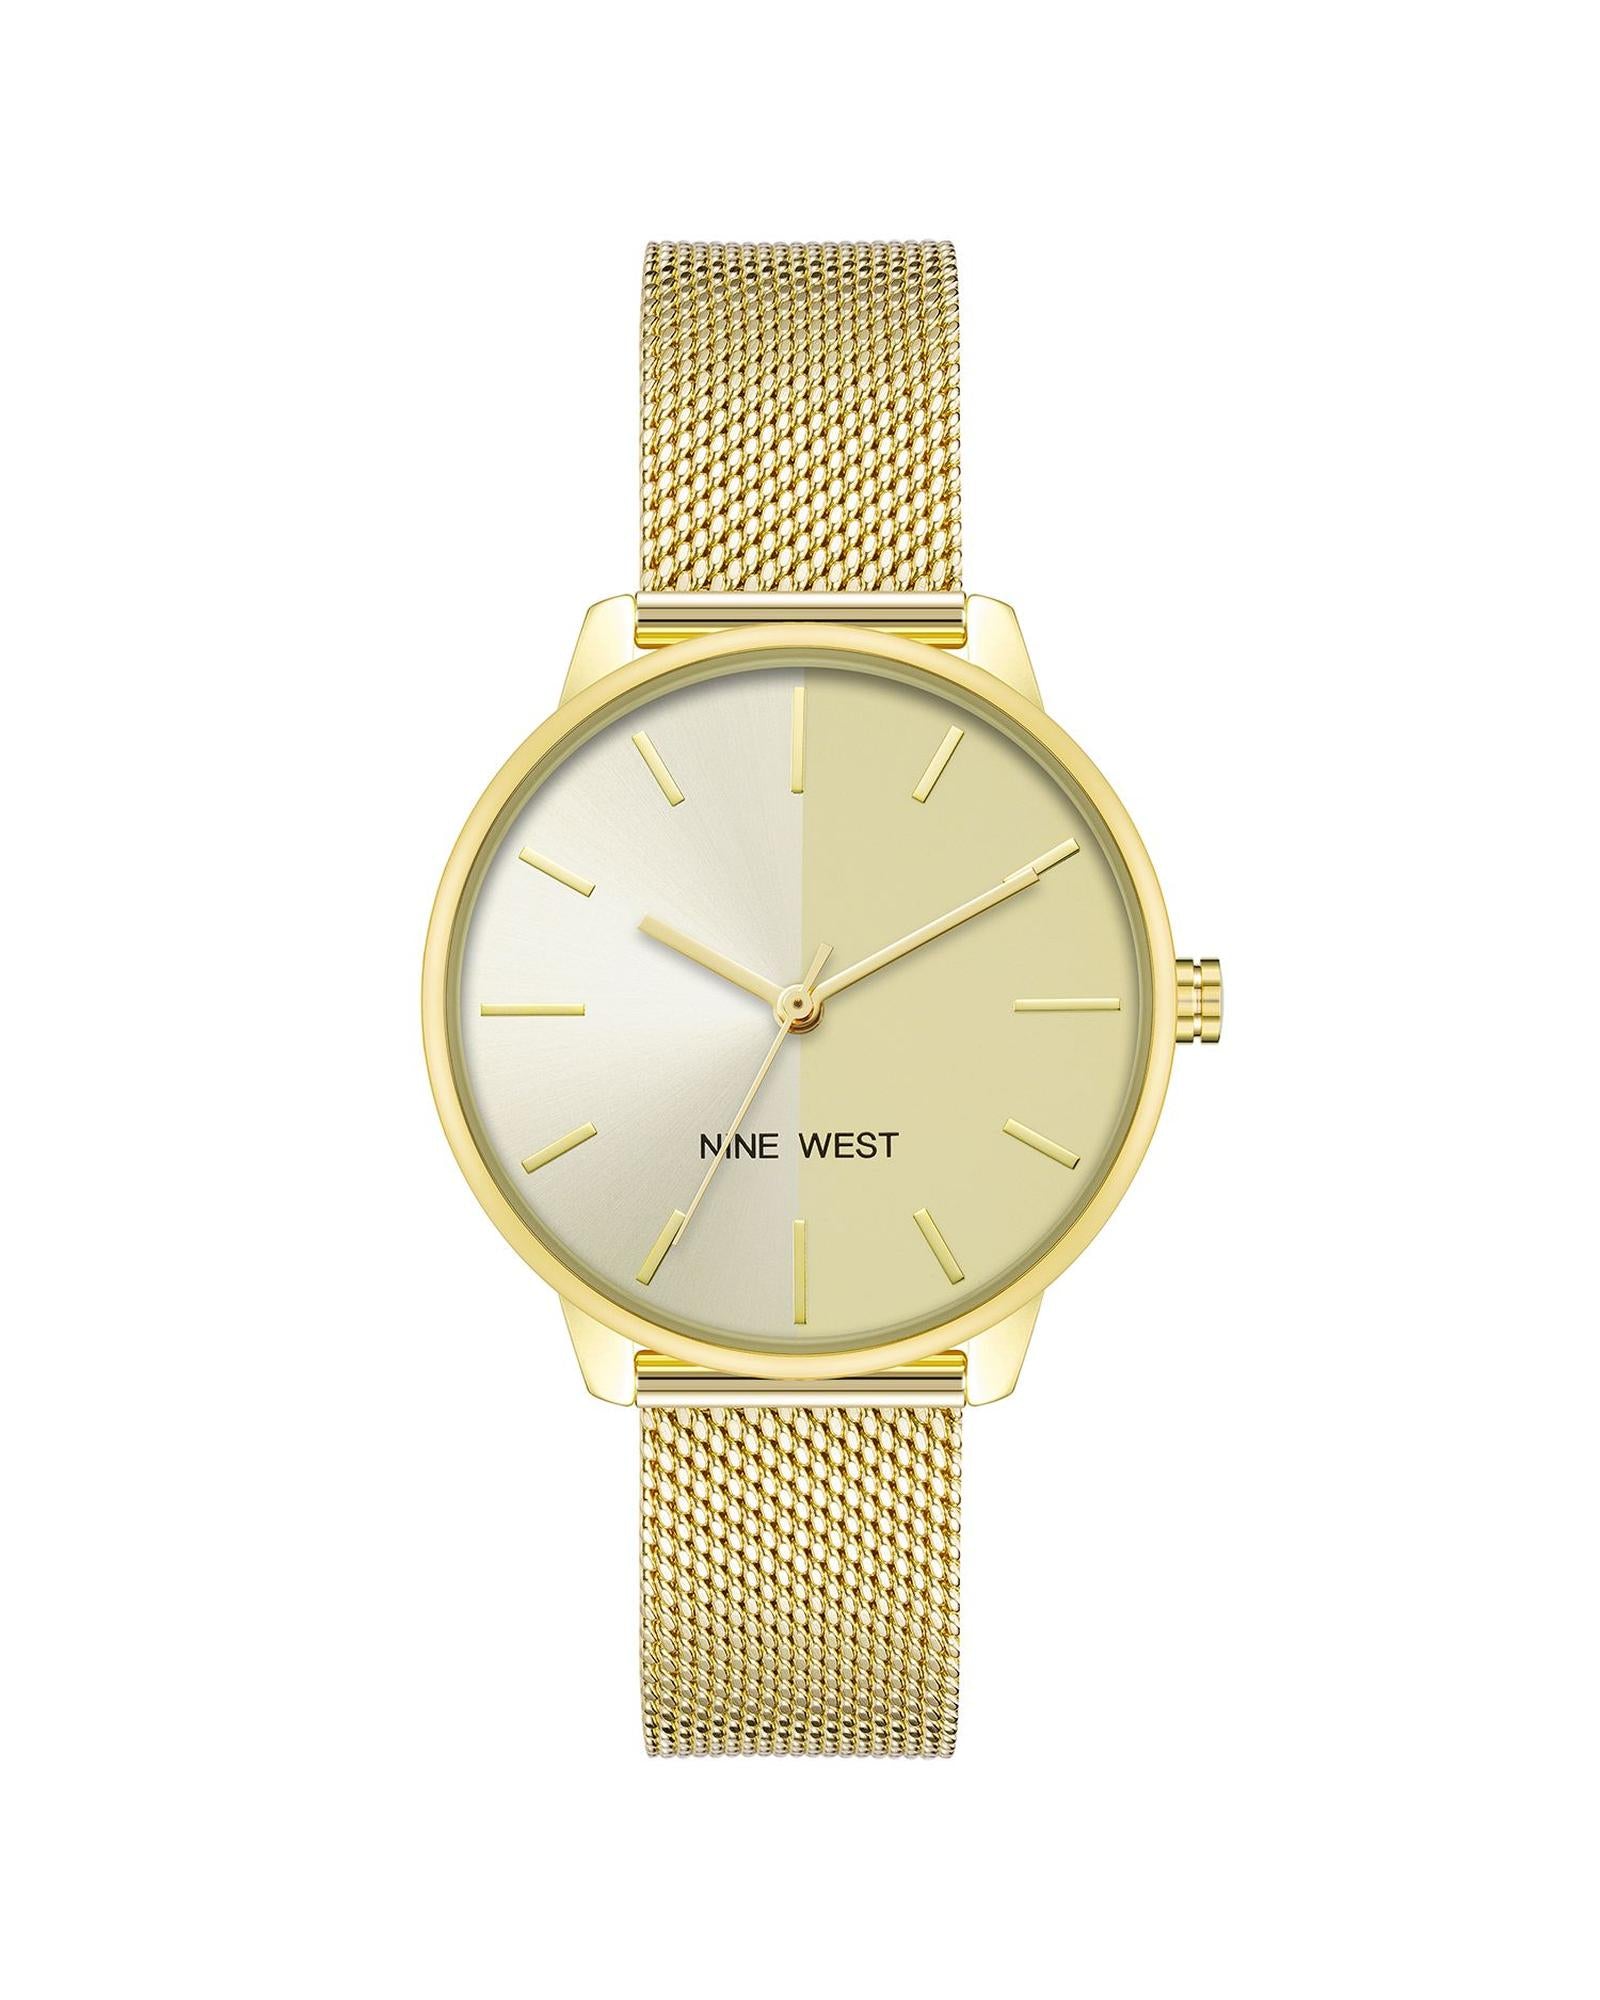 Gold Analog Bangle Watch with Dual Time Functions One Size Women